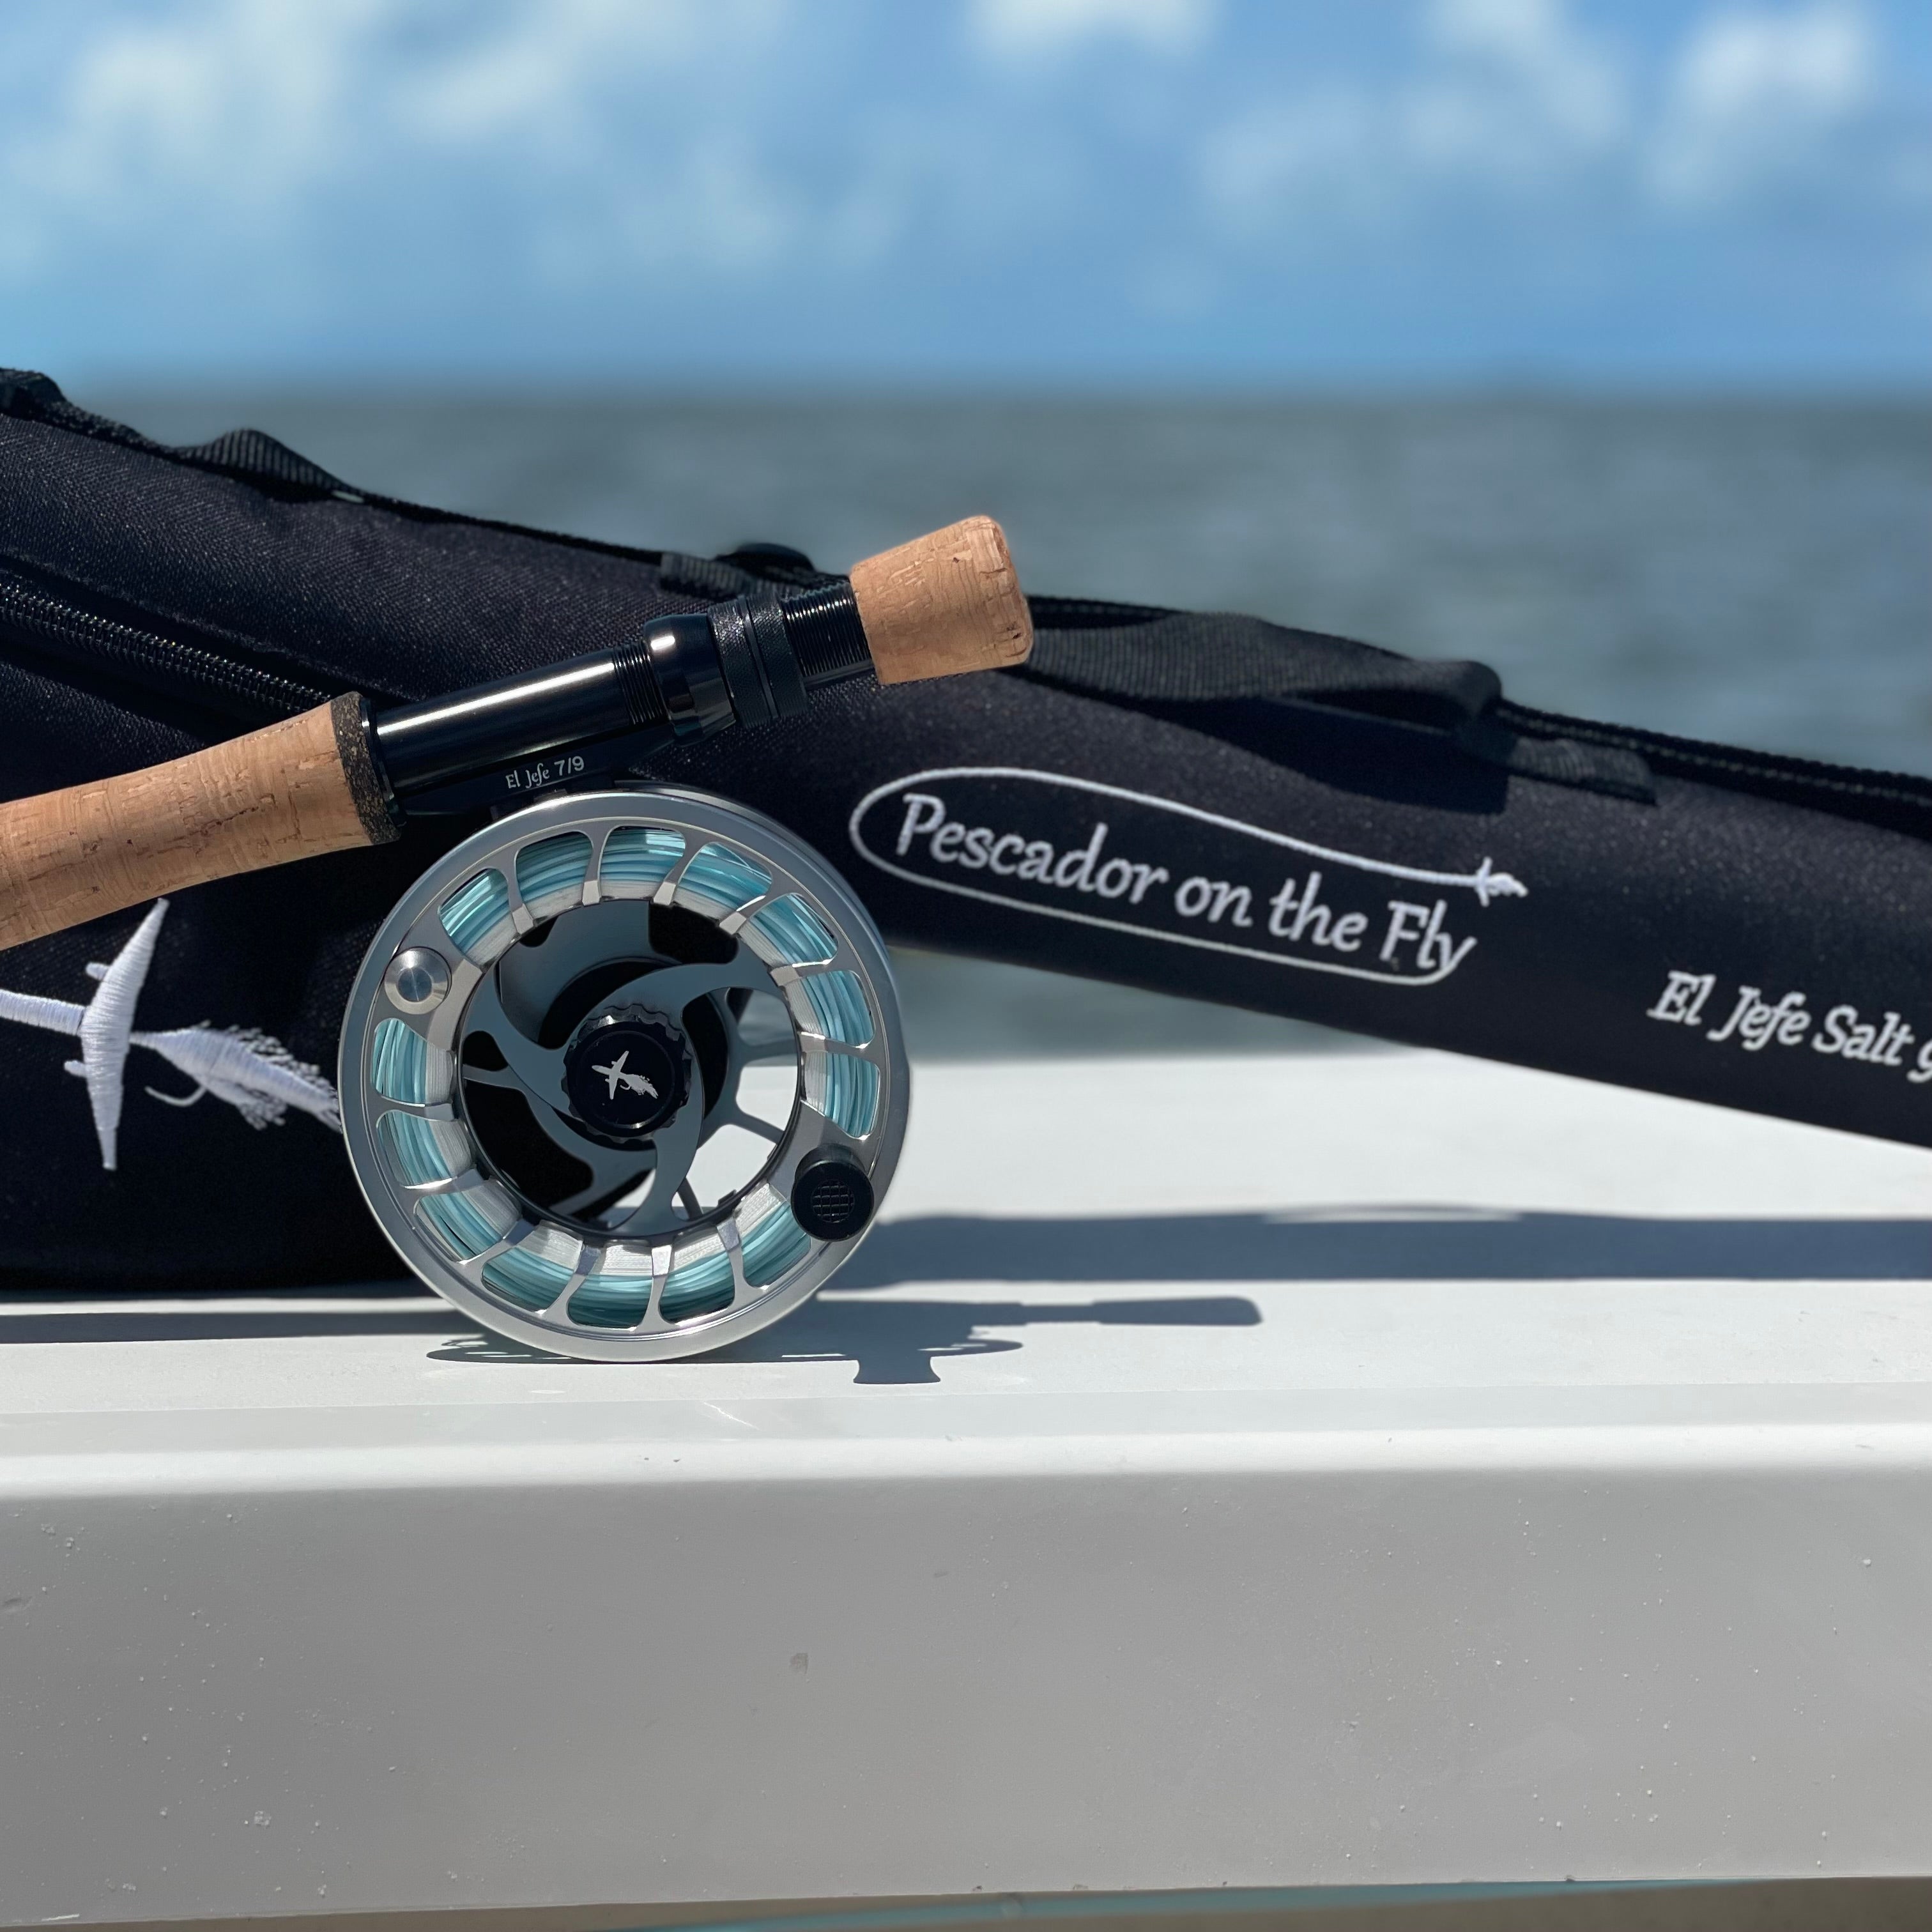 El Jefe Saltwater Fly Fishing Combo Package |906-7 | 9' Six Section 7 Weight Fly Rod And Reel Outfit